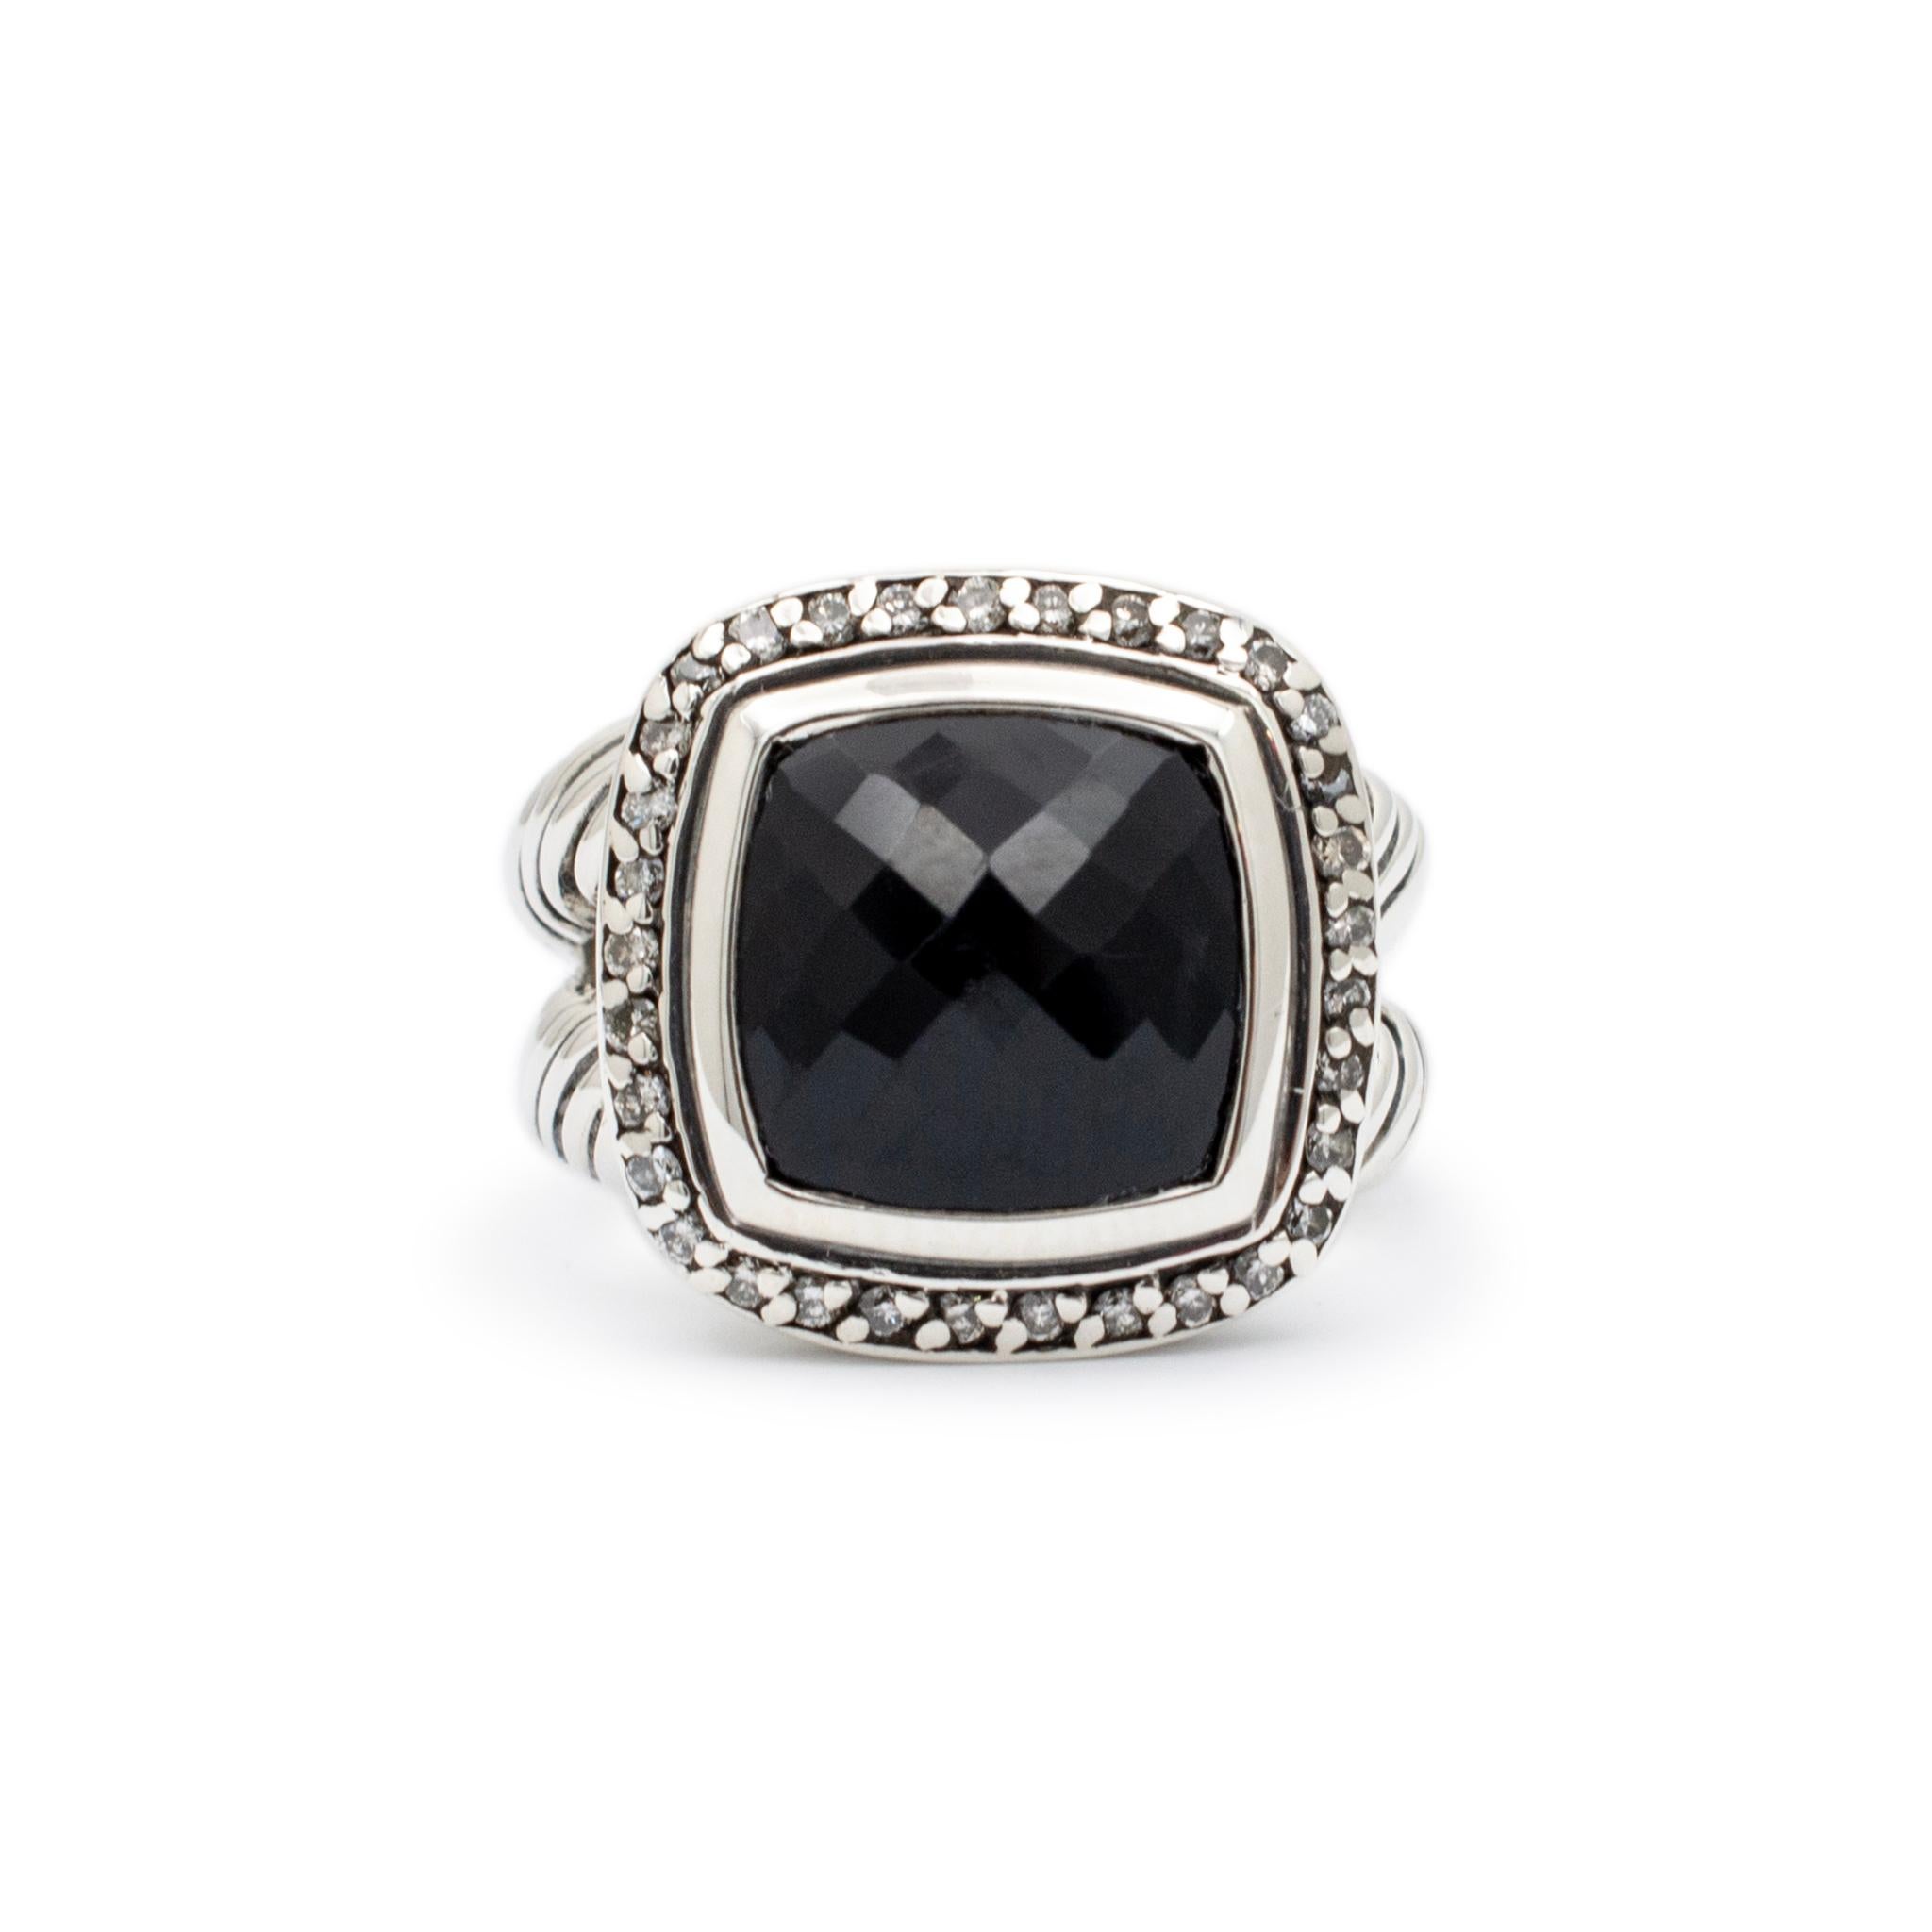 Brand: David Yurman

Metal Type: Sterling Silver

Size: 6

Shank Maximum Width: 9.70mm

Head measurement: 16.00mm x 15.75mm

Weight: 7.70 grams

Silver onyx and diamond cocktail ring with a split-shank. Engraved with 